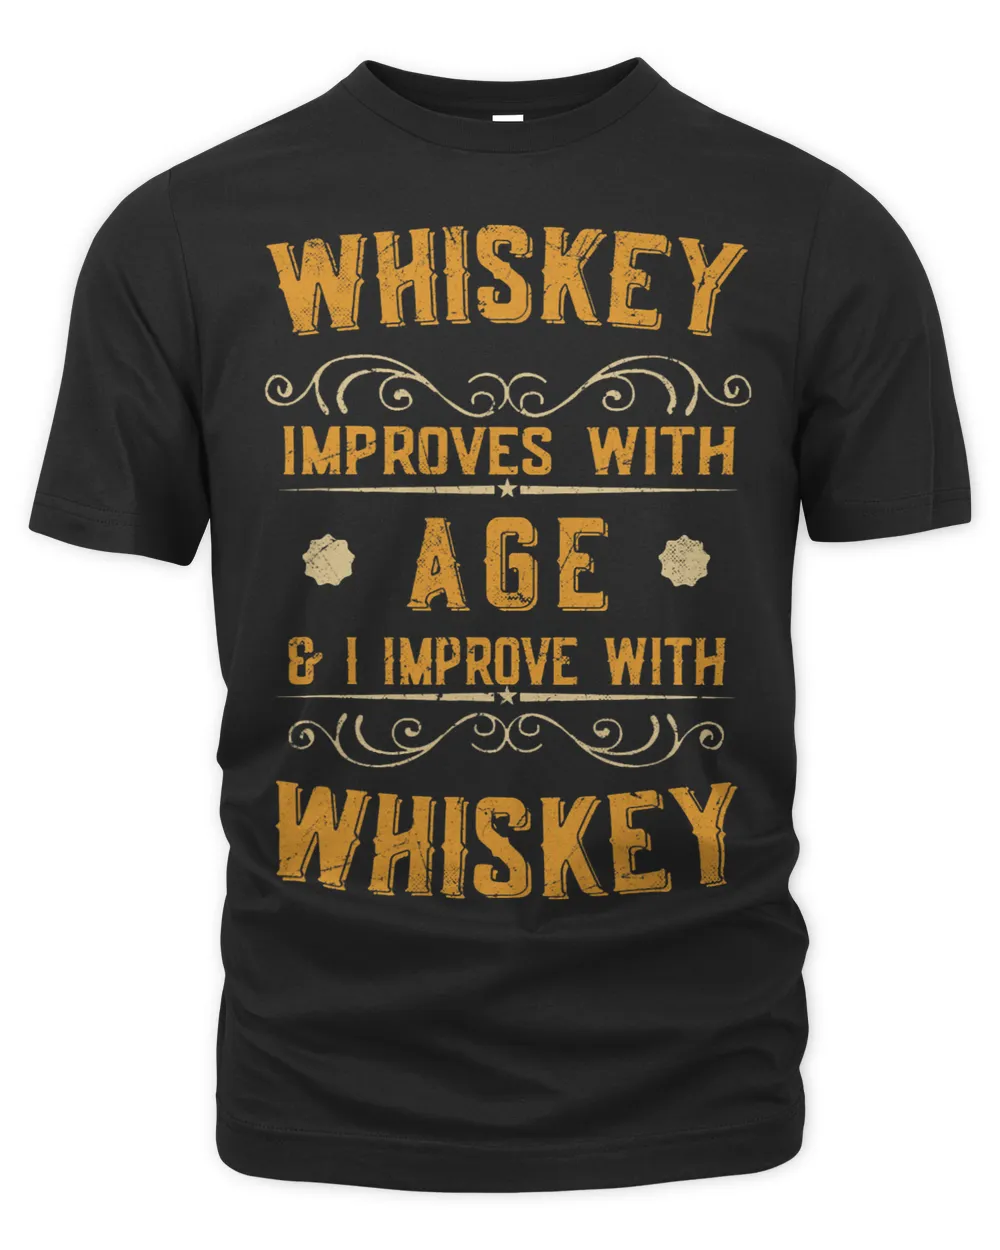 Whiskey improves with age and I improve with whiskey bourbon